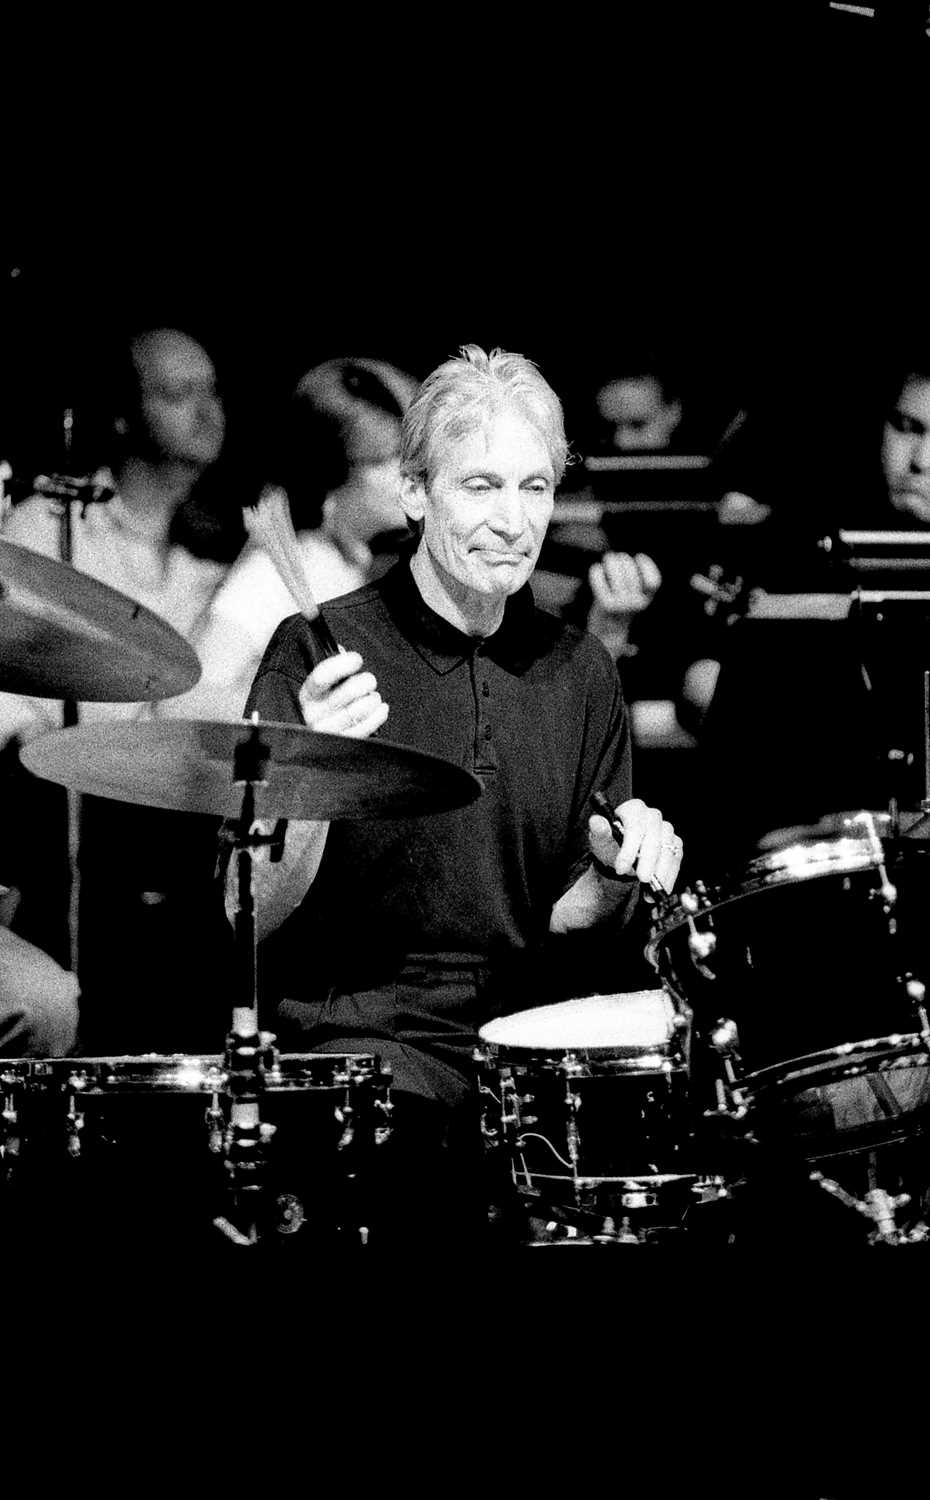 Lot 37 - CHARLIE WATTS NEGATIVES - WITH COPYRIGHT